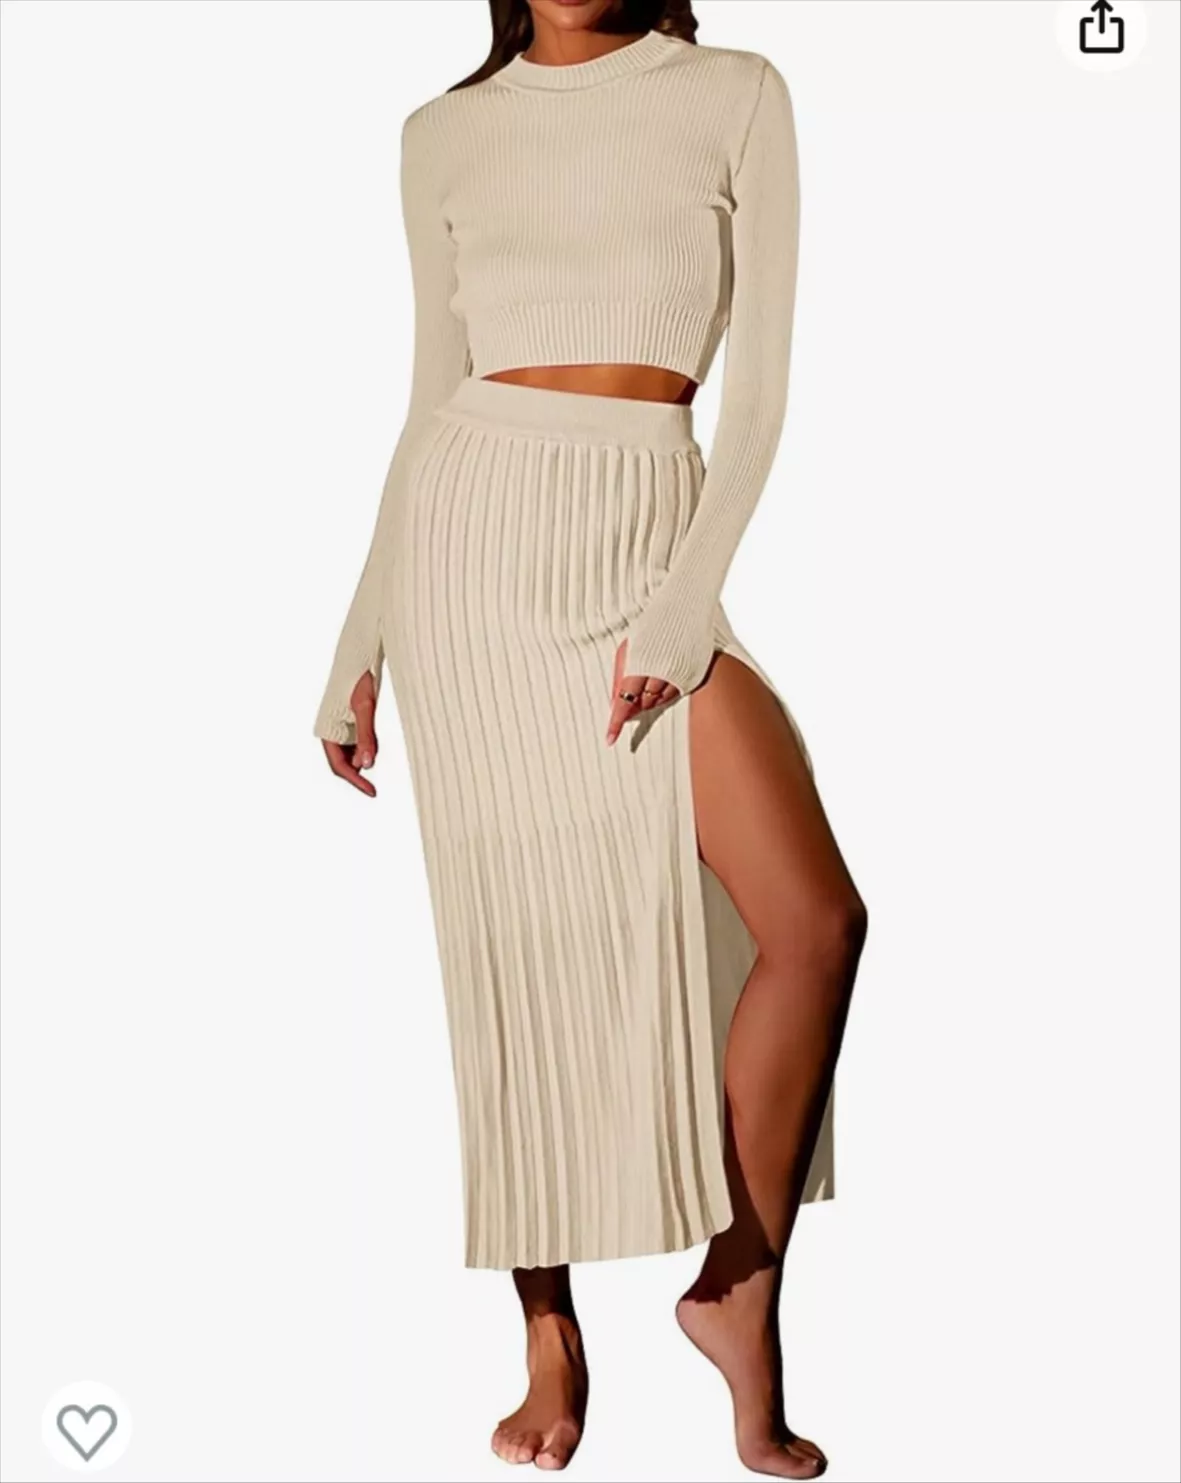 Sweater Sets for Women 2 Piece Knit Long Sleeves Top and Bodycon